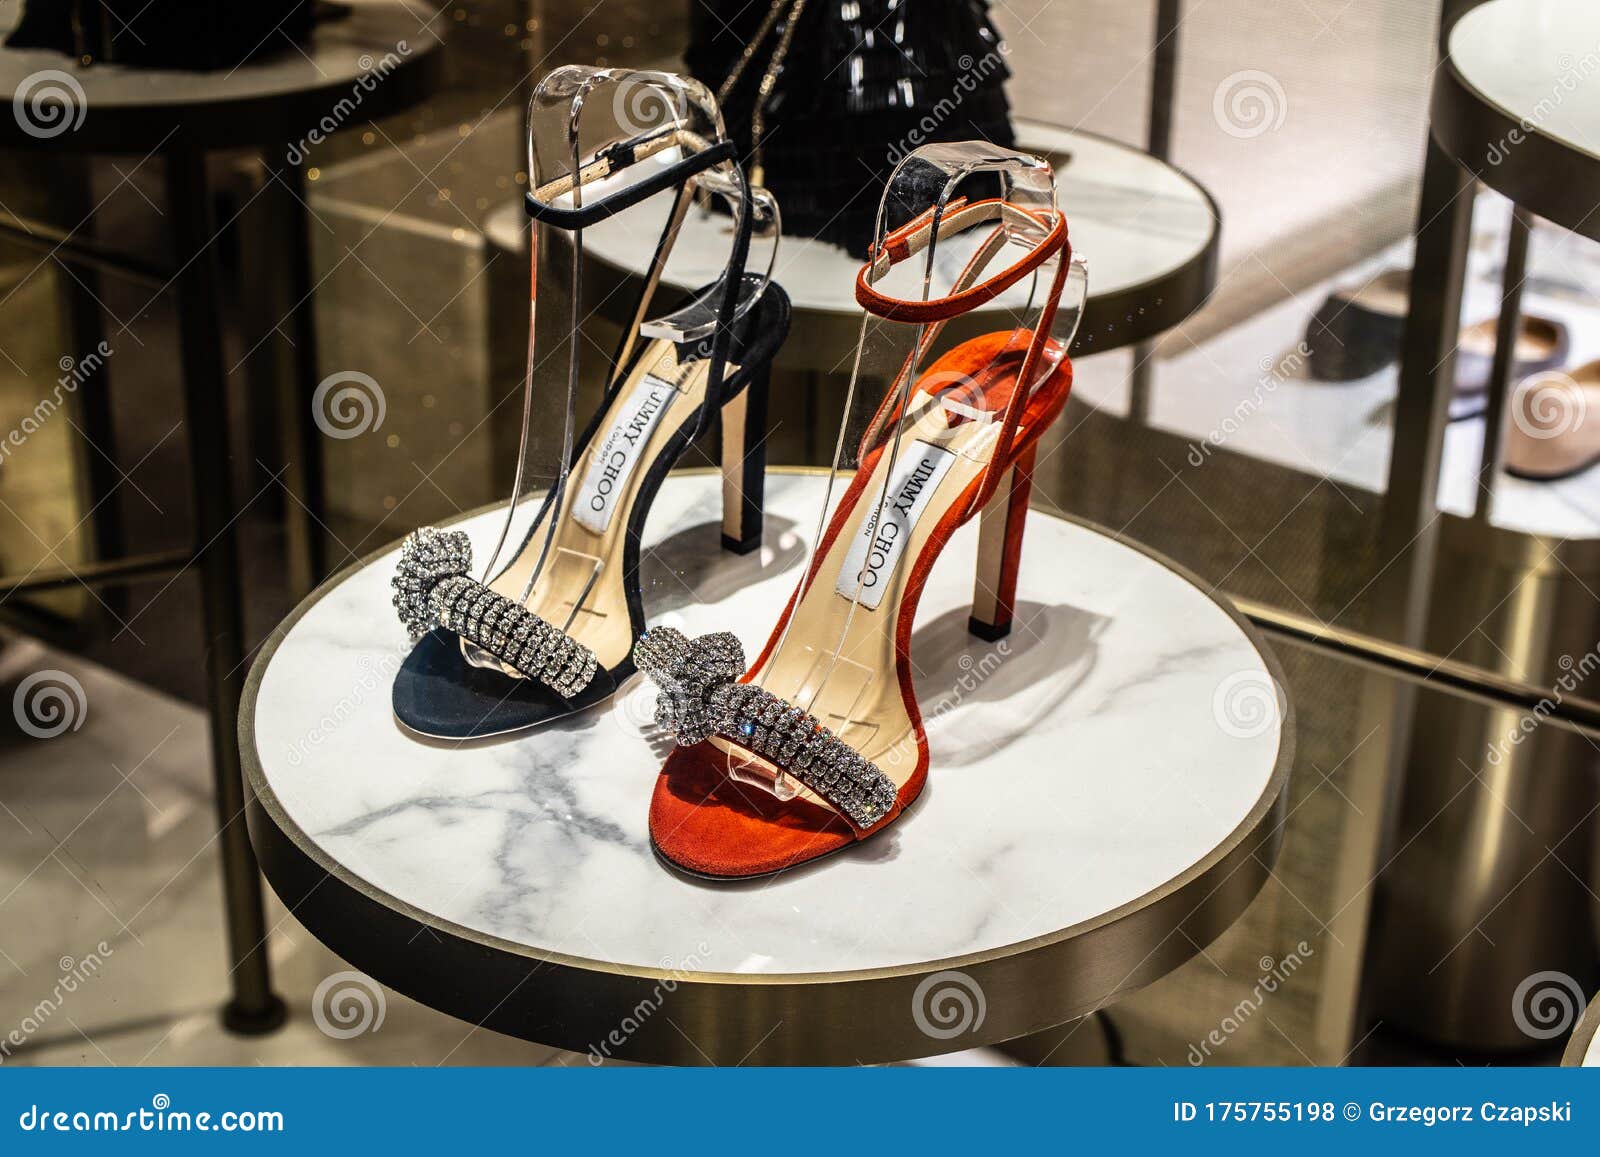 Jimmy Choo Fashion Store, Window Shop, Bags, Clothes and Shoes on ...